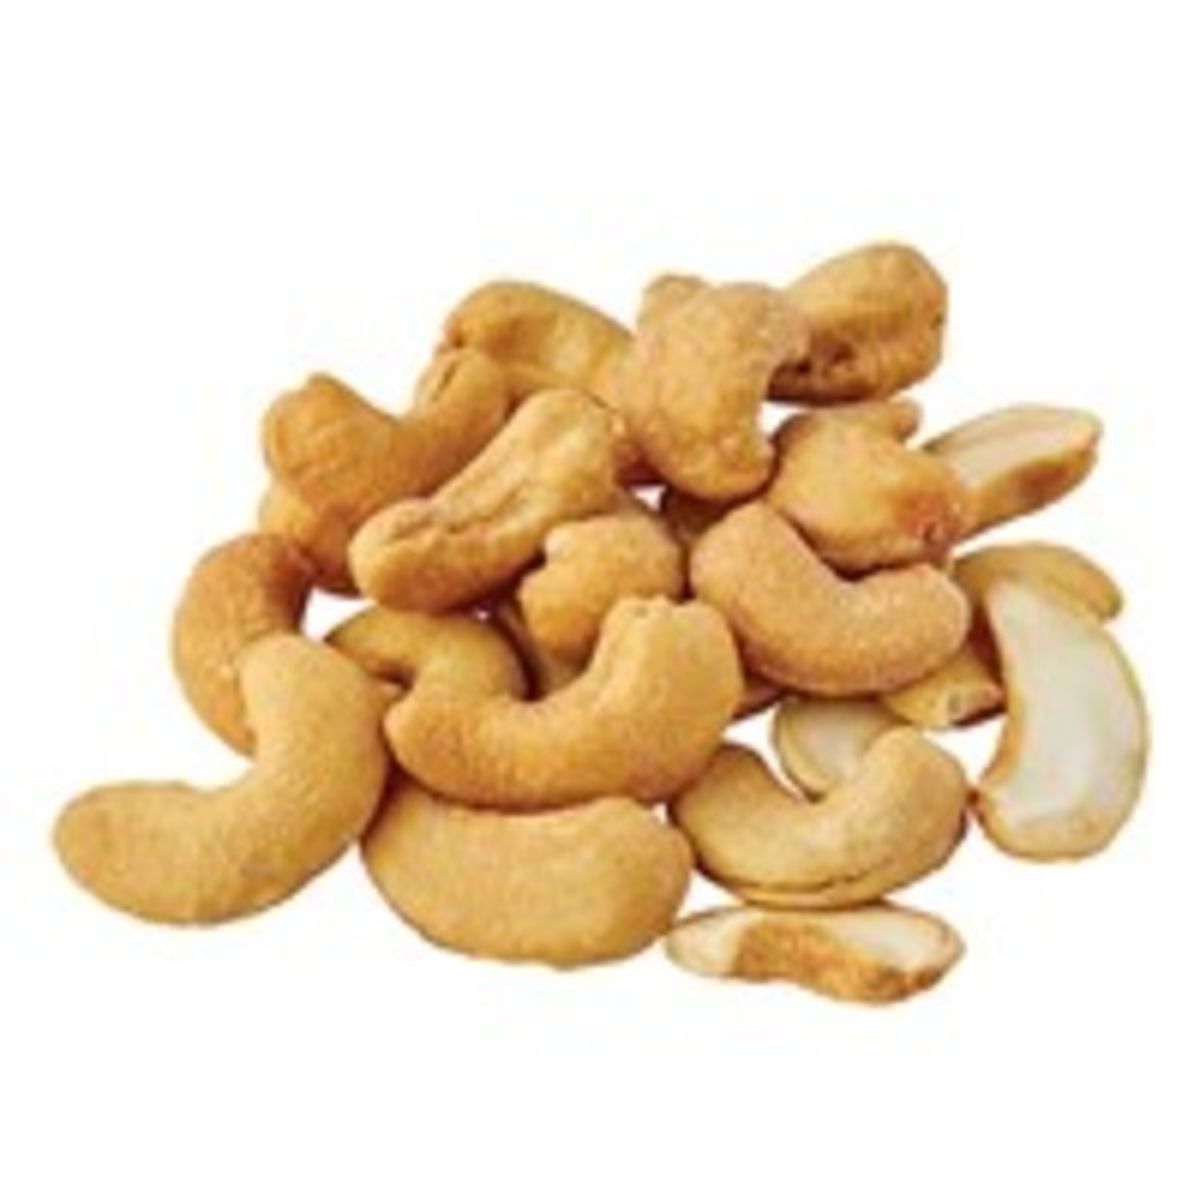 Calories in Wegmans Whole Roasted and Salted Cashews